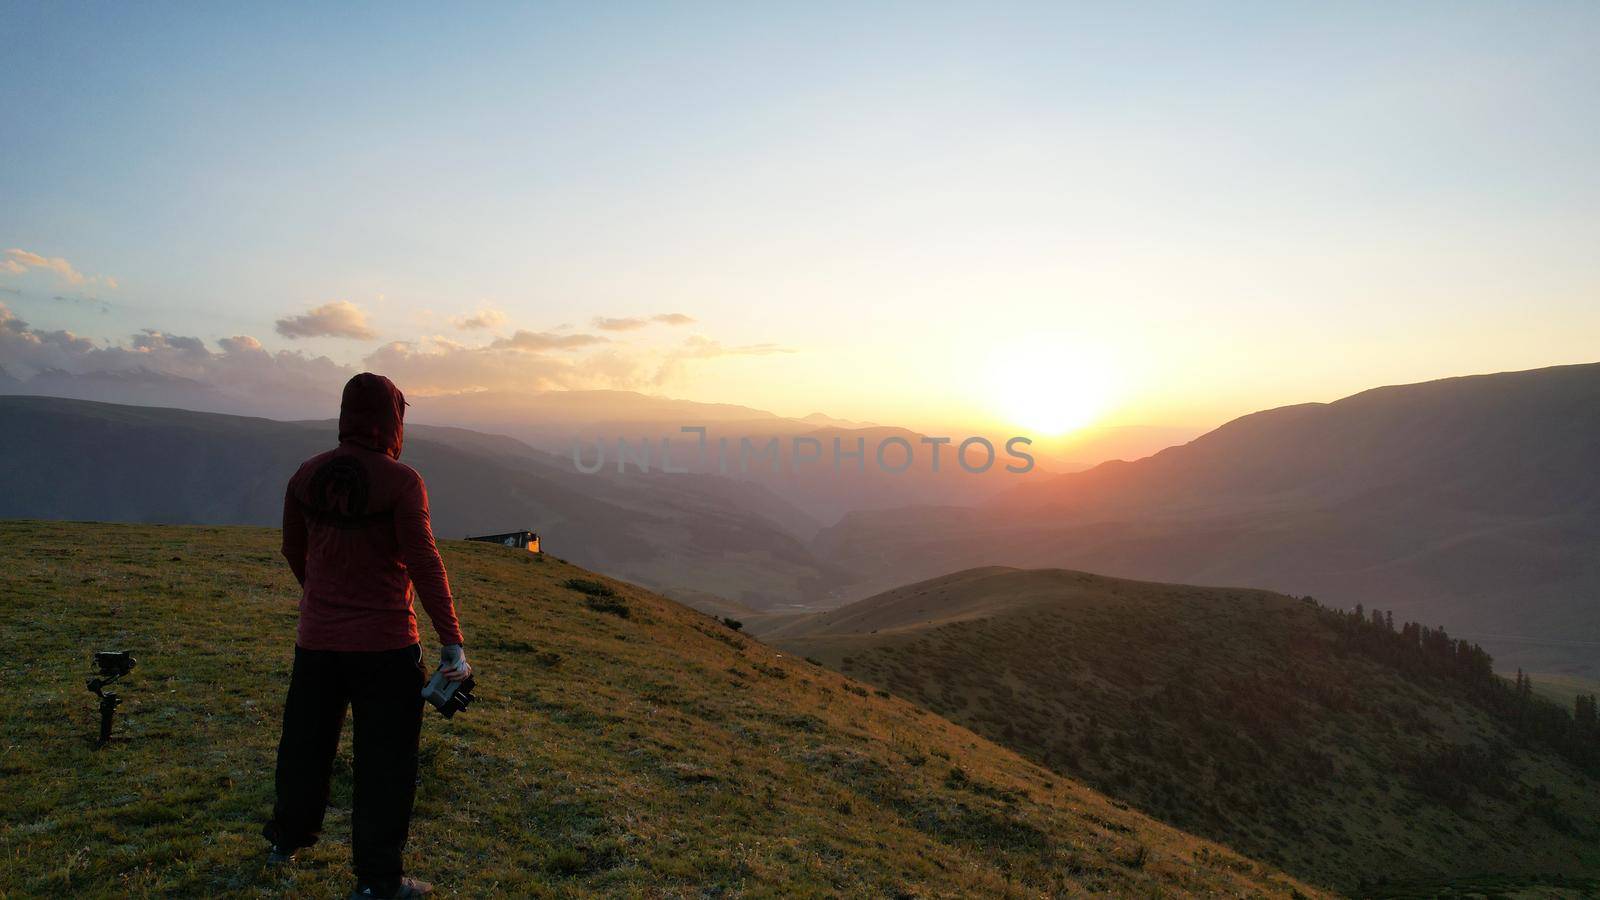 A guy in the mountains is watching the sunset. An epic orange-red sunset is reflected on small clouds and green hills. Bushes and forest grow in places on mountains. The guy is standing with his back